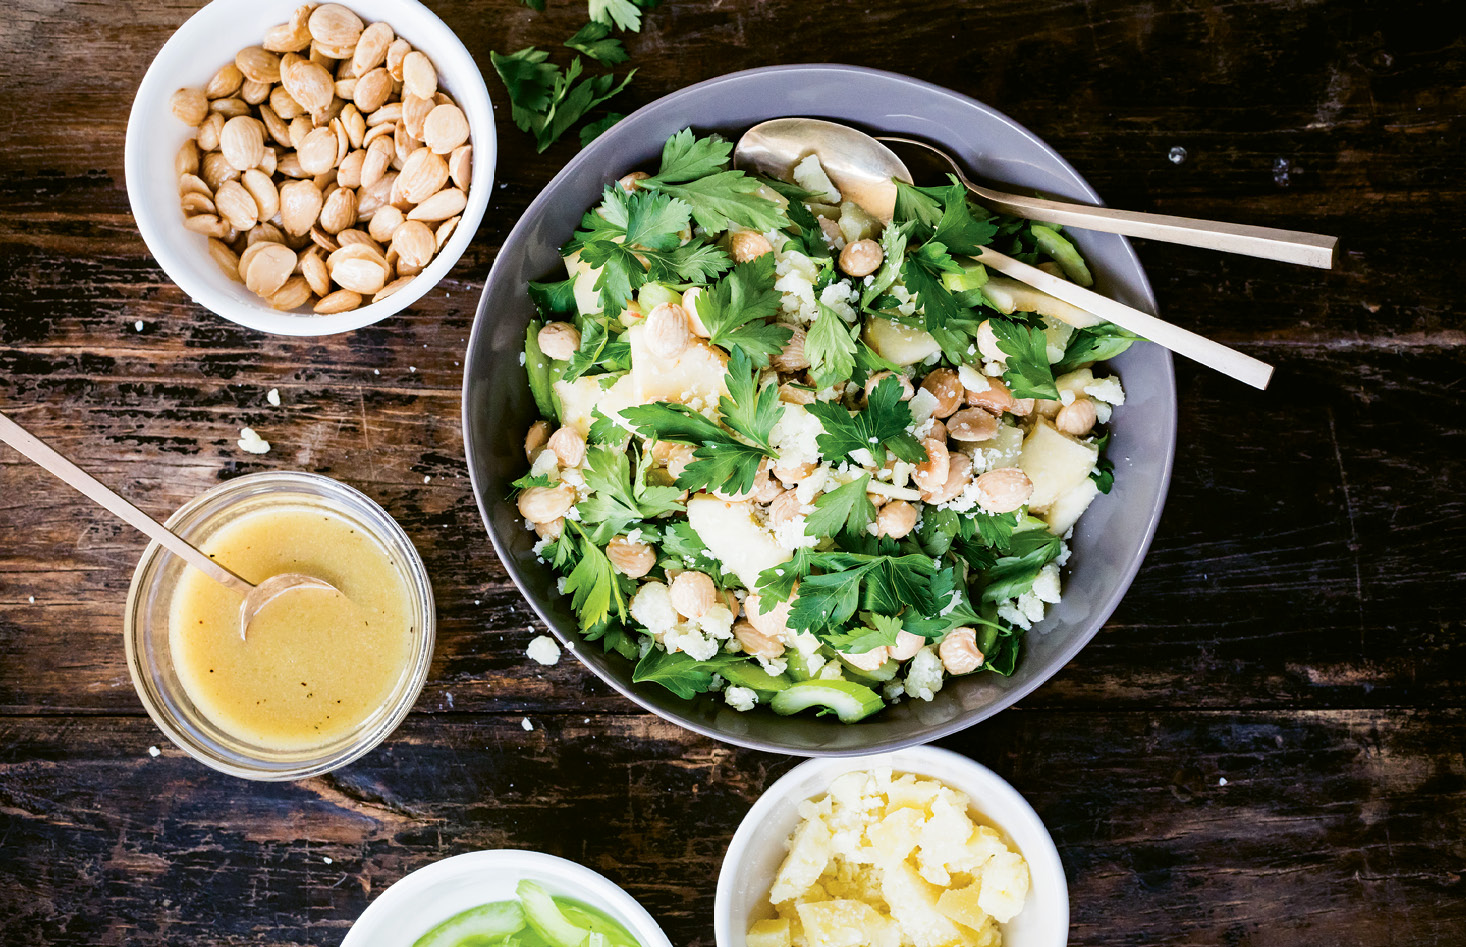 Apples, almonds, and buttery Manchego cheese combine for a simple and sweet brunch salad.